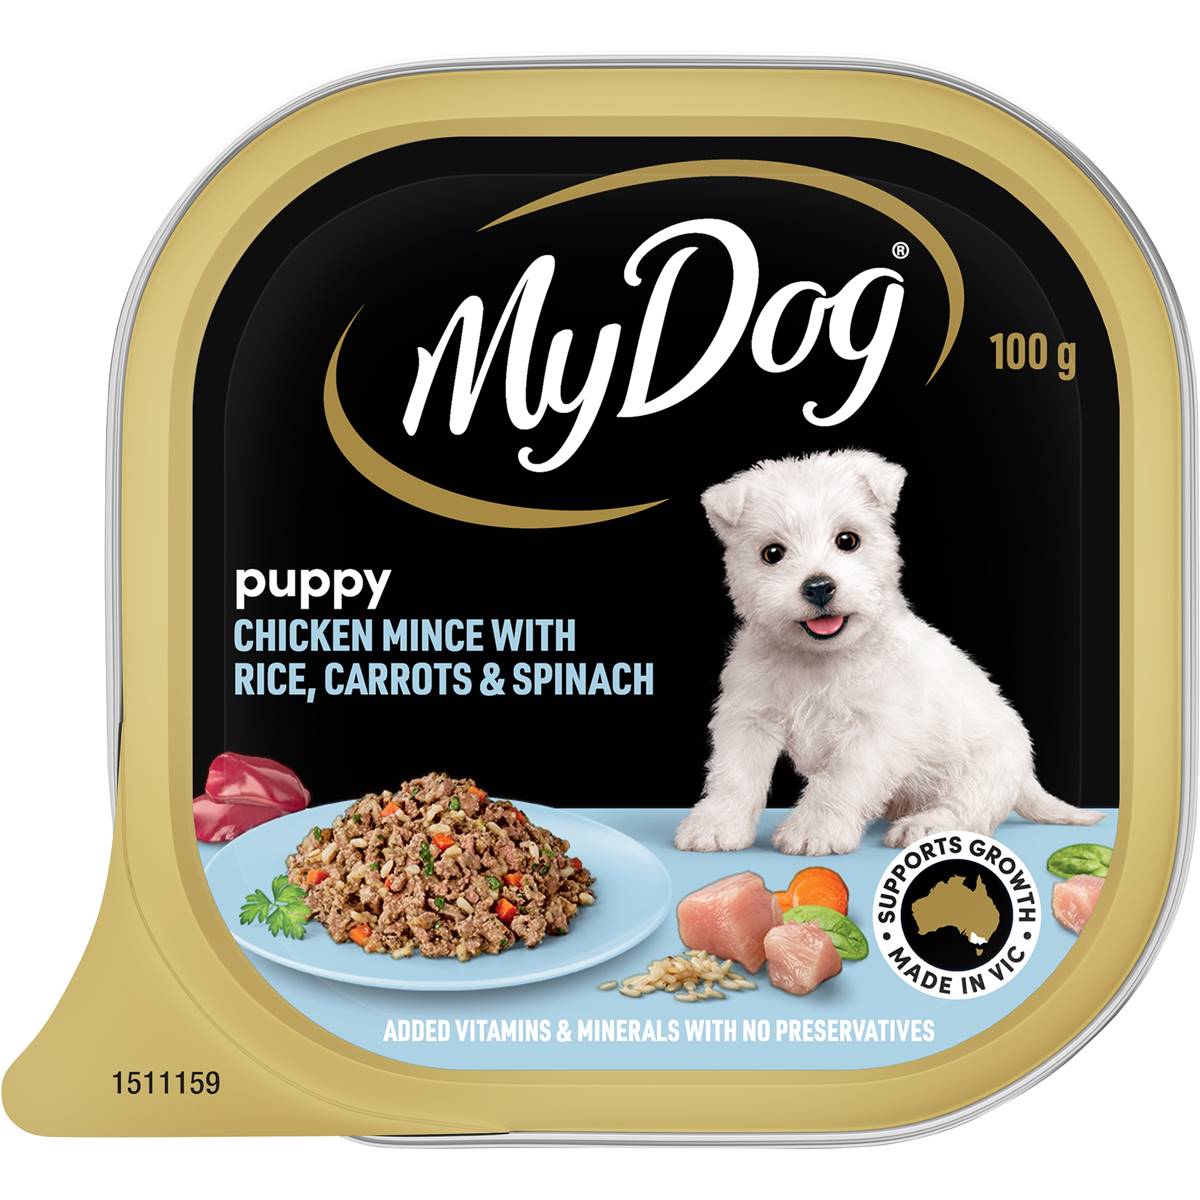 My Dog Puppy Chicken Mince With Rice Carrot & Spinach Dog Food Tray 100g